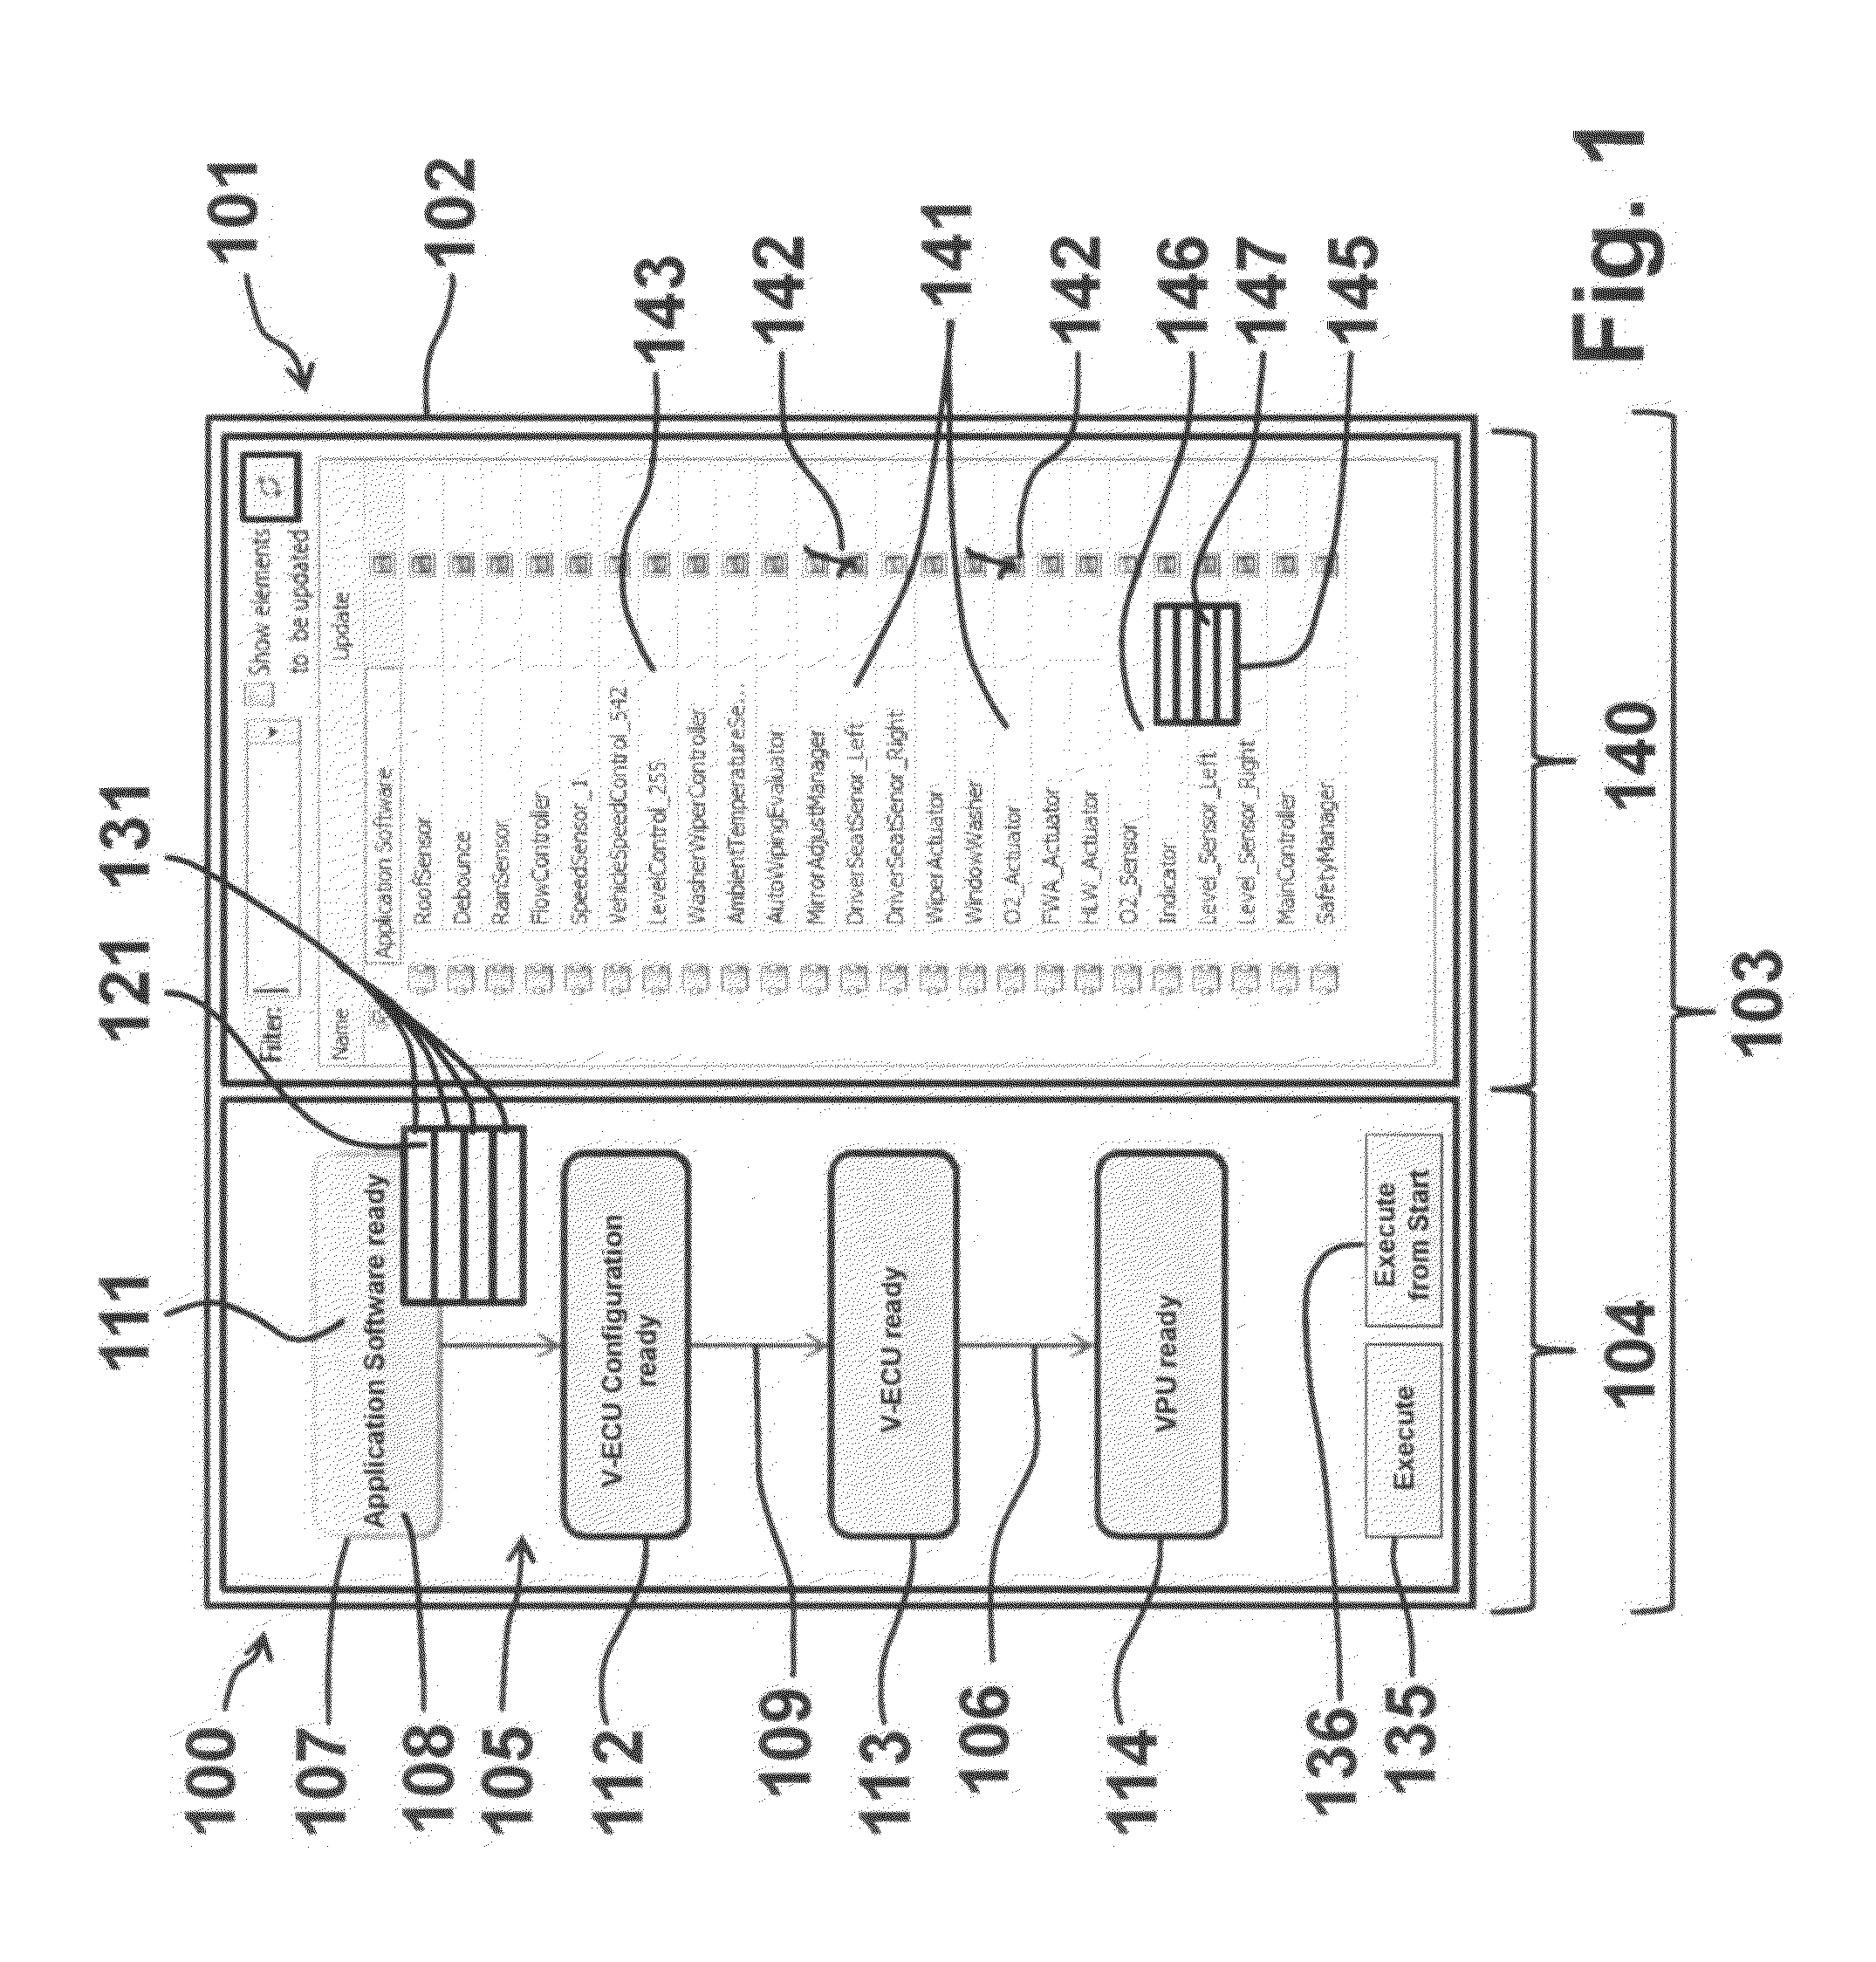 Development system and method for creating a control unit program